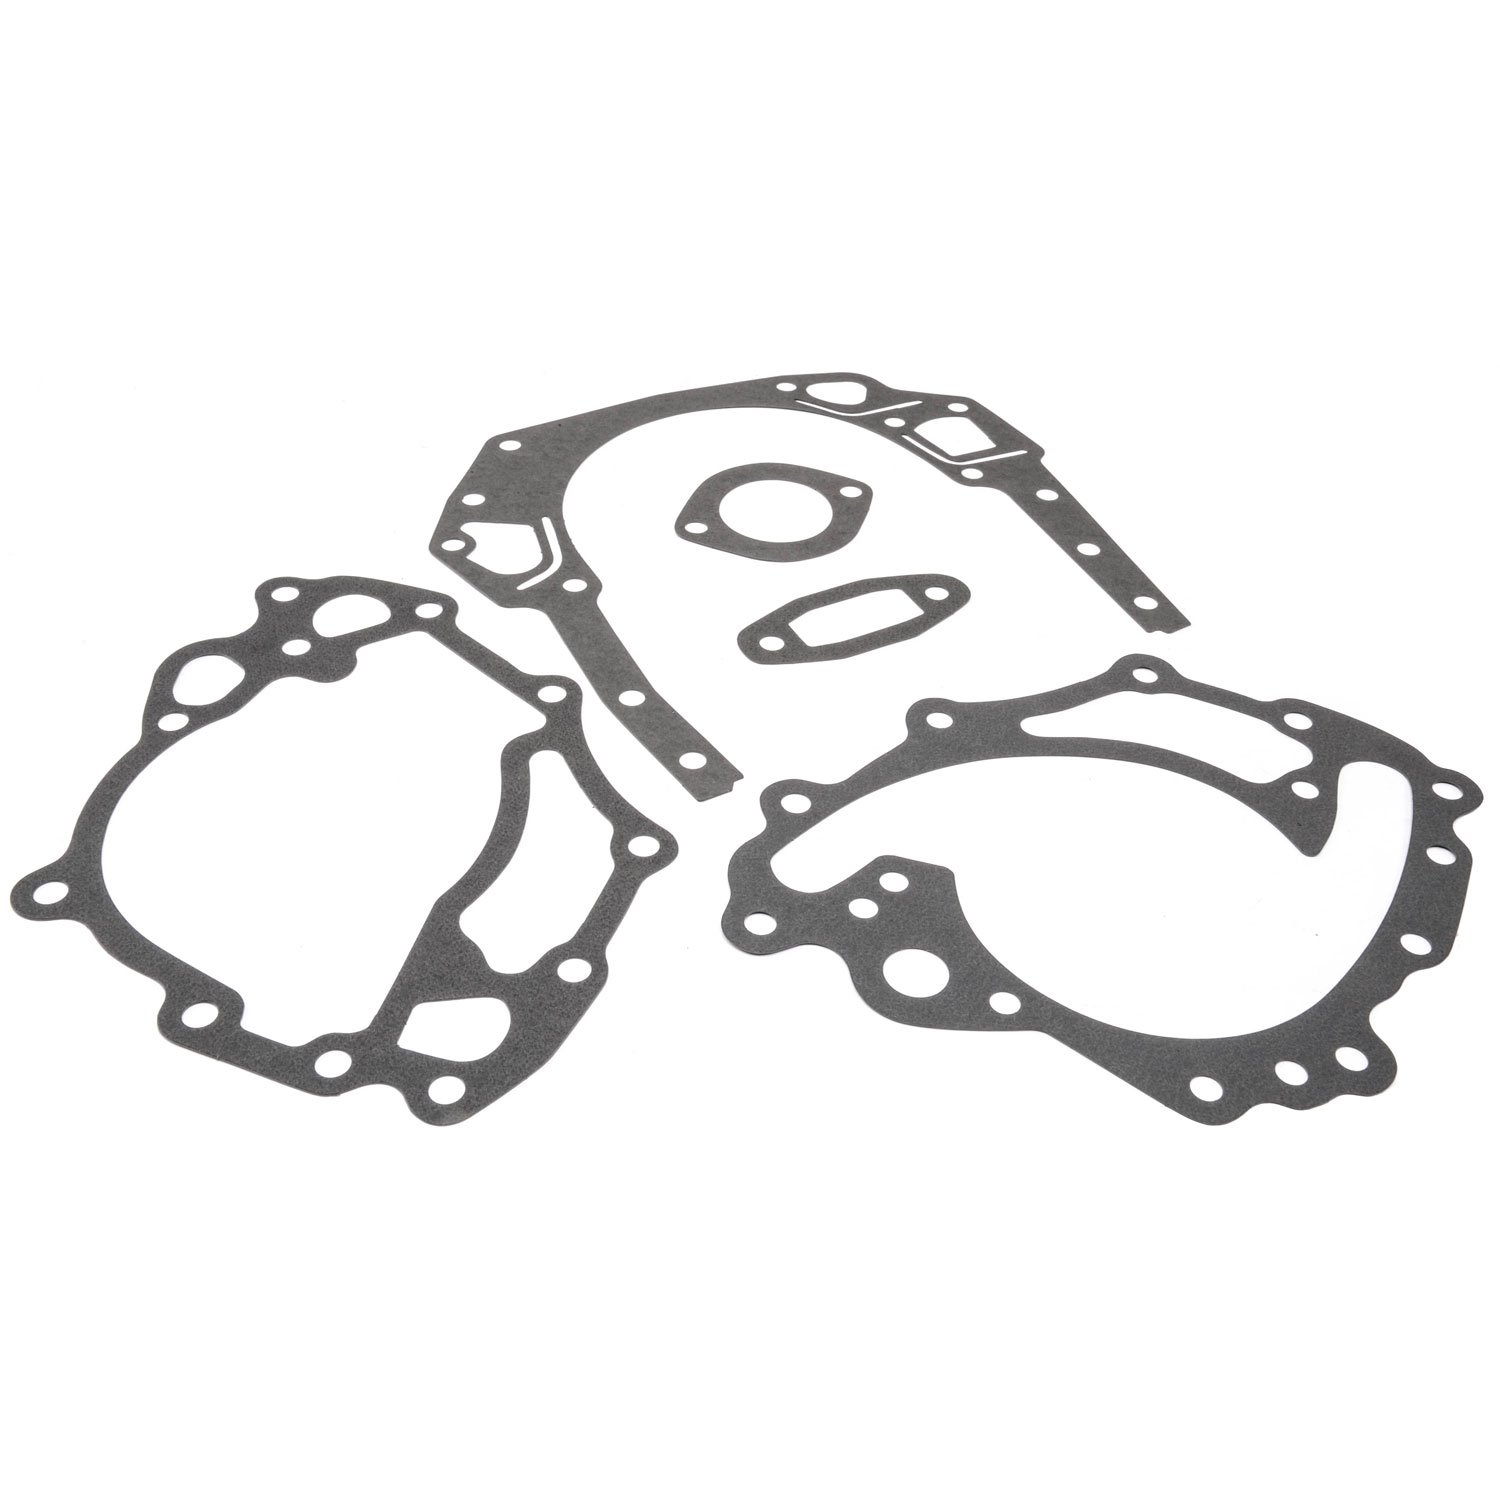 JEGS Timing Cover Fits 1965-1990 Big Block Chevy Engines Polished Cast Aluminum Includes Timing Cover, Timing Cover Gasket, Water Pump Gaskets, - 2